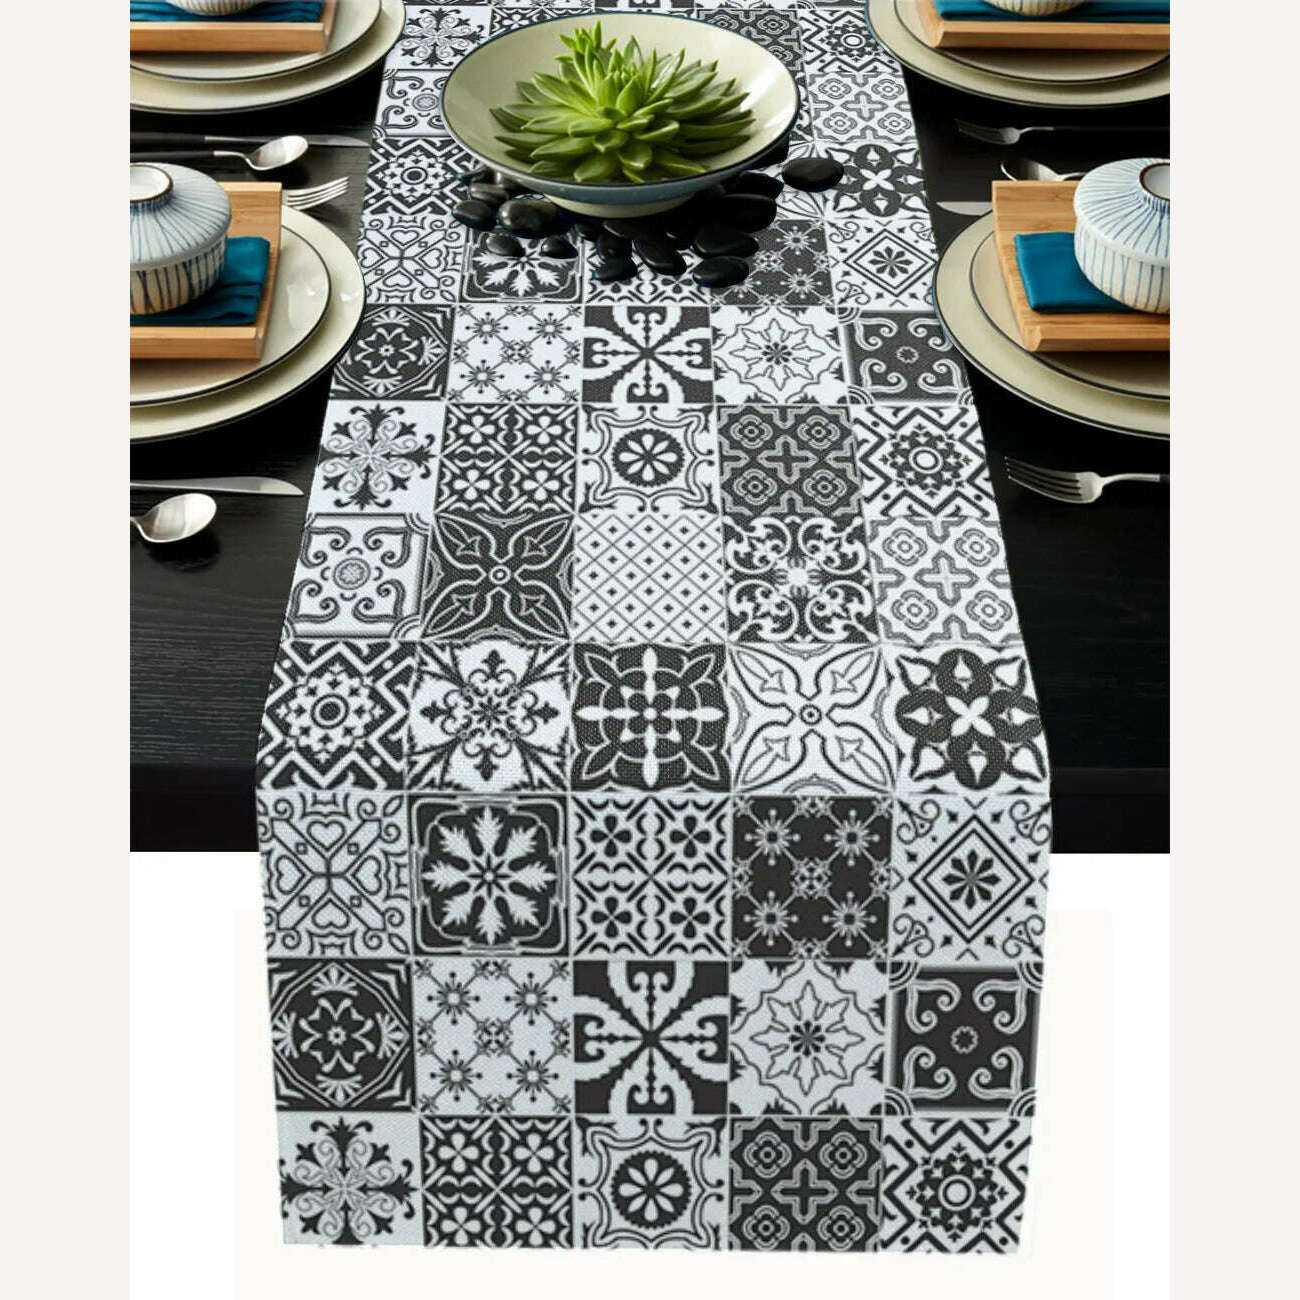 KIMLUD, Linen Burlap Table Runner Colorful Morocco Flowers Islam Arabesque Kitchen Table Runners Dinner Party Wedding Events Decor, LEX09489 / 180x33cm70x13inch, KIMLUD Womens Clothes